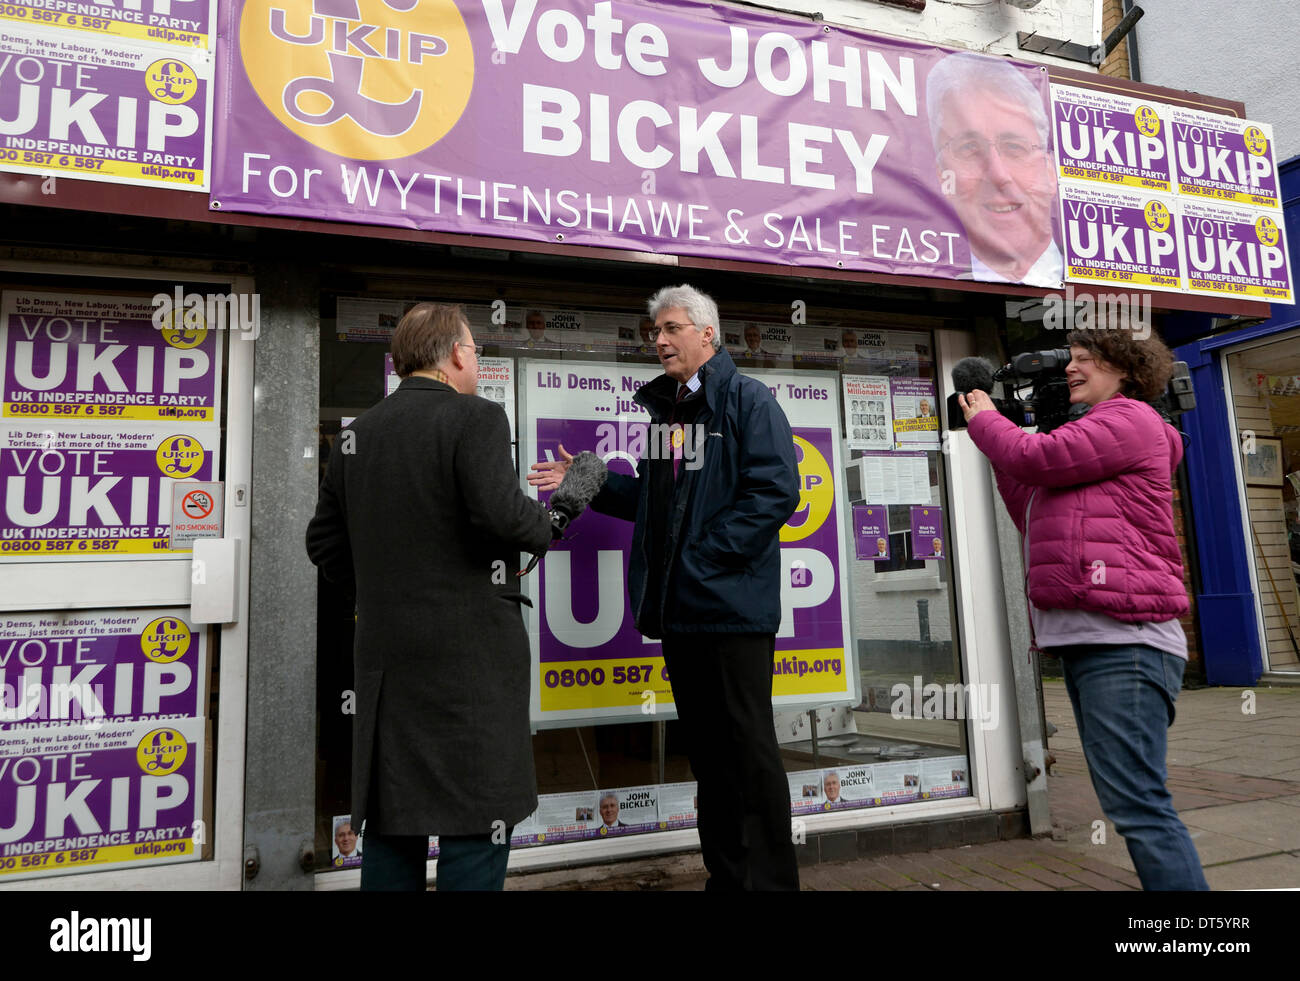 Sale, Manchester, UK. 10th February 2014. John Bickley, the UKIP candidate answers questions from Michael Crick of Channel 4 outside his campaign office in Sale, Greater Manchester, The by-election, to be held on Thursday February 13, is because of the death of Paul Goggins, who died on January 7th. UKIP, Wythenshawe and Sale East By-Election   Greater Manchester, UK  10 February 2014 Credit:  John Fryer/Alamy Live News Stock Photo